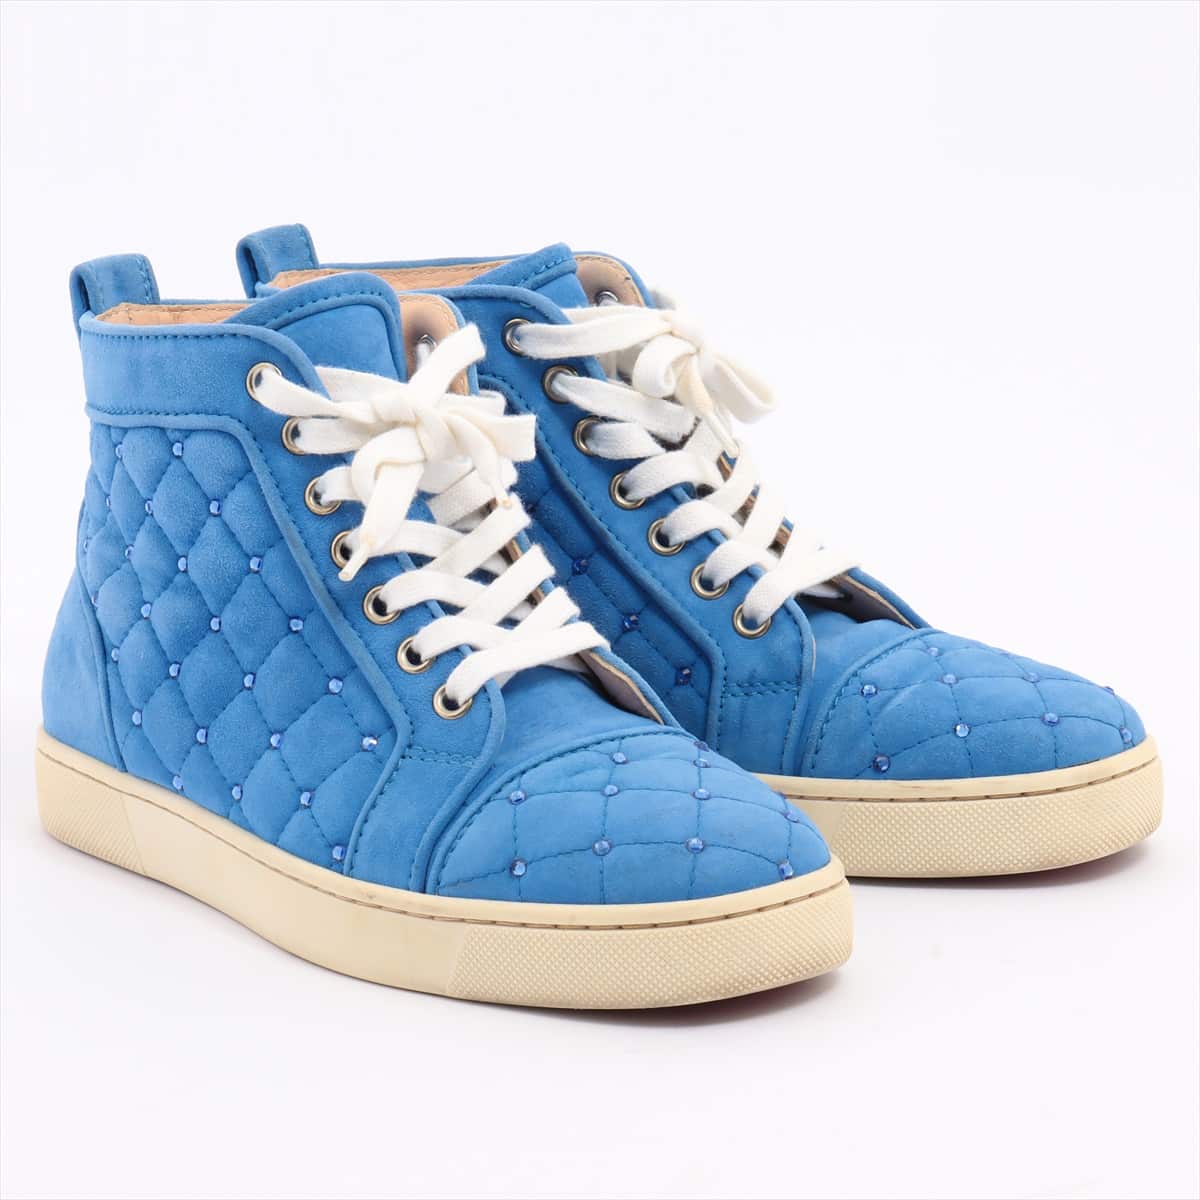 Christian Louboutin Suede High-top Sneakers 36 Ladies' Blue